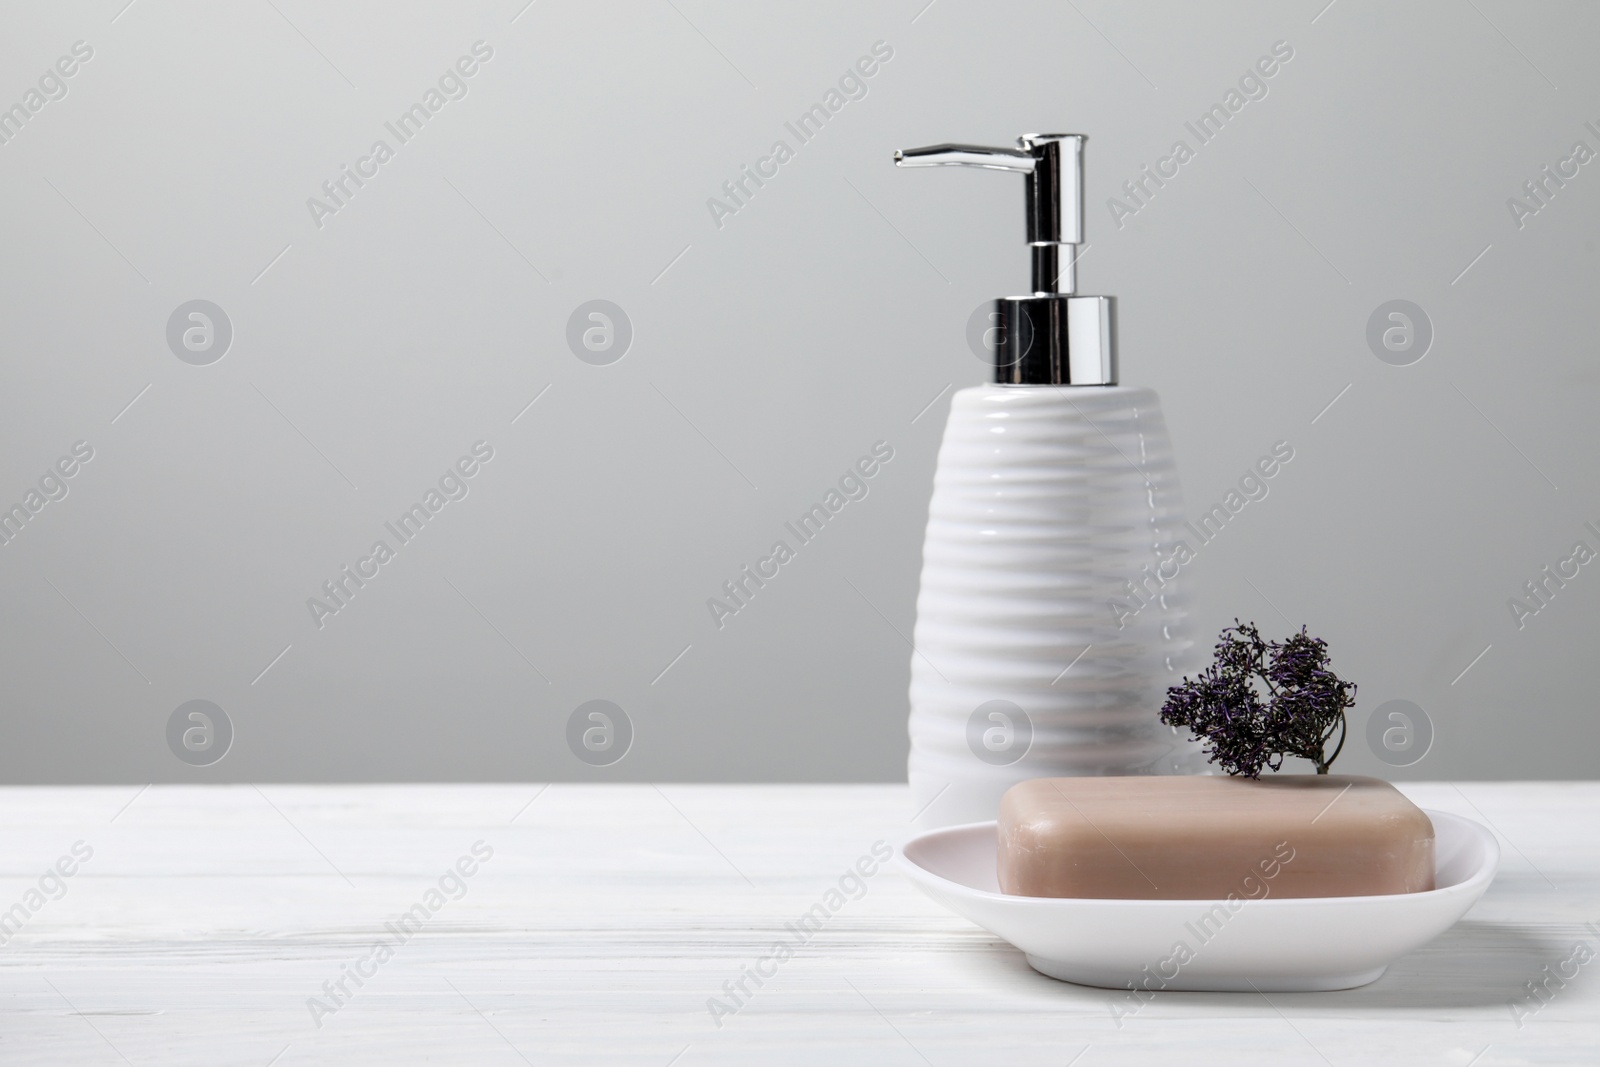 Photo of Soap bar and bottle dispenser on wooden table against white background, space for text